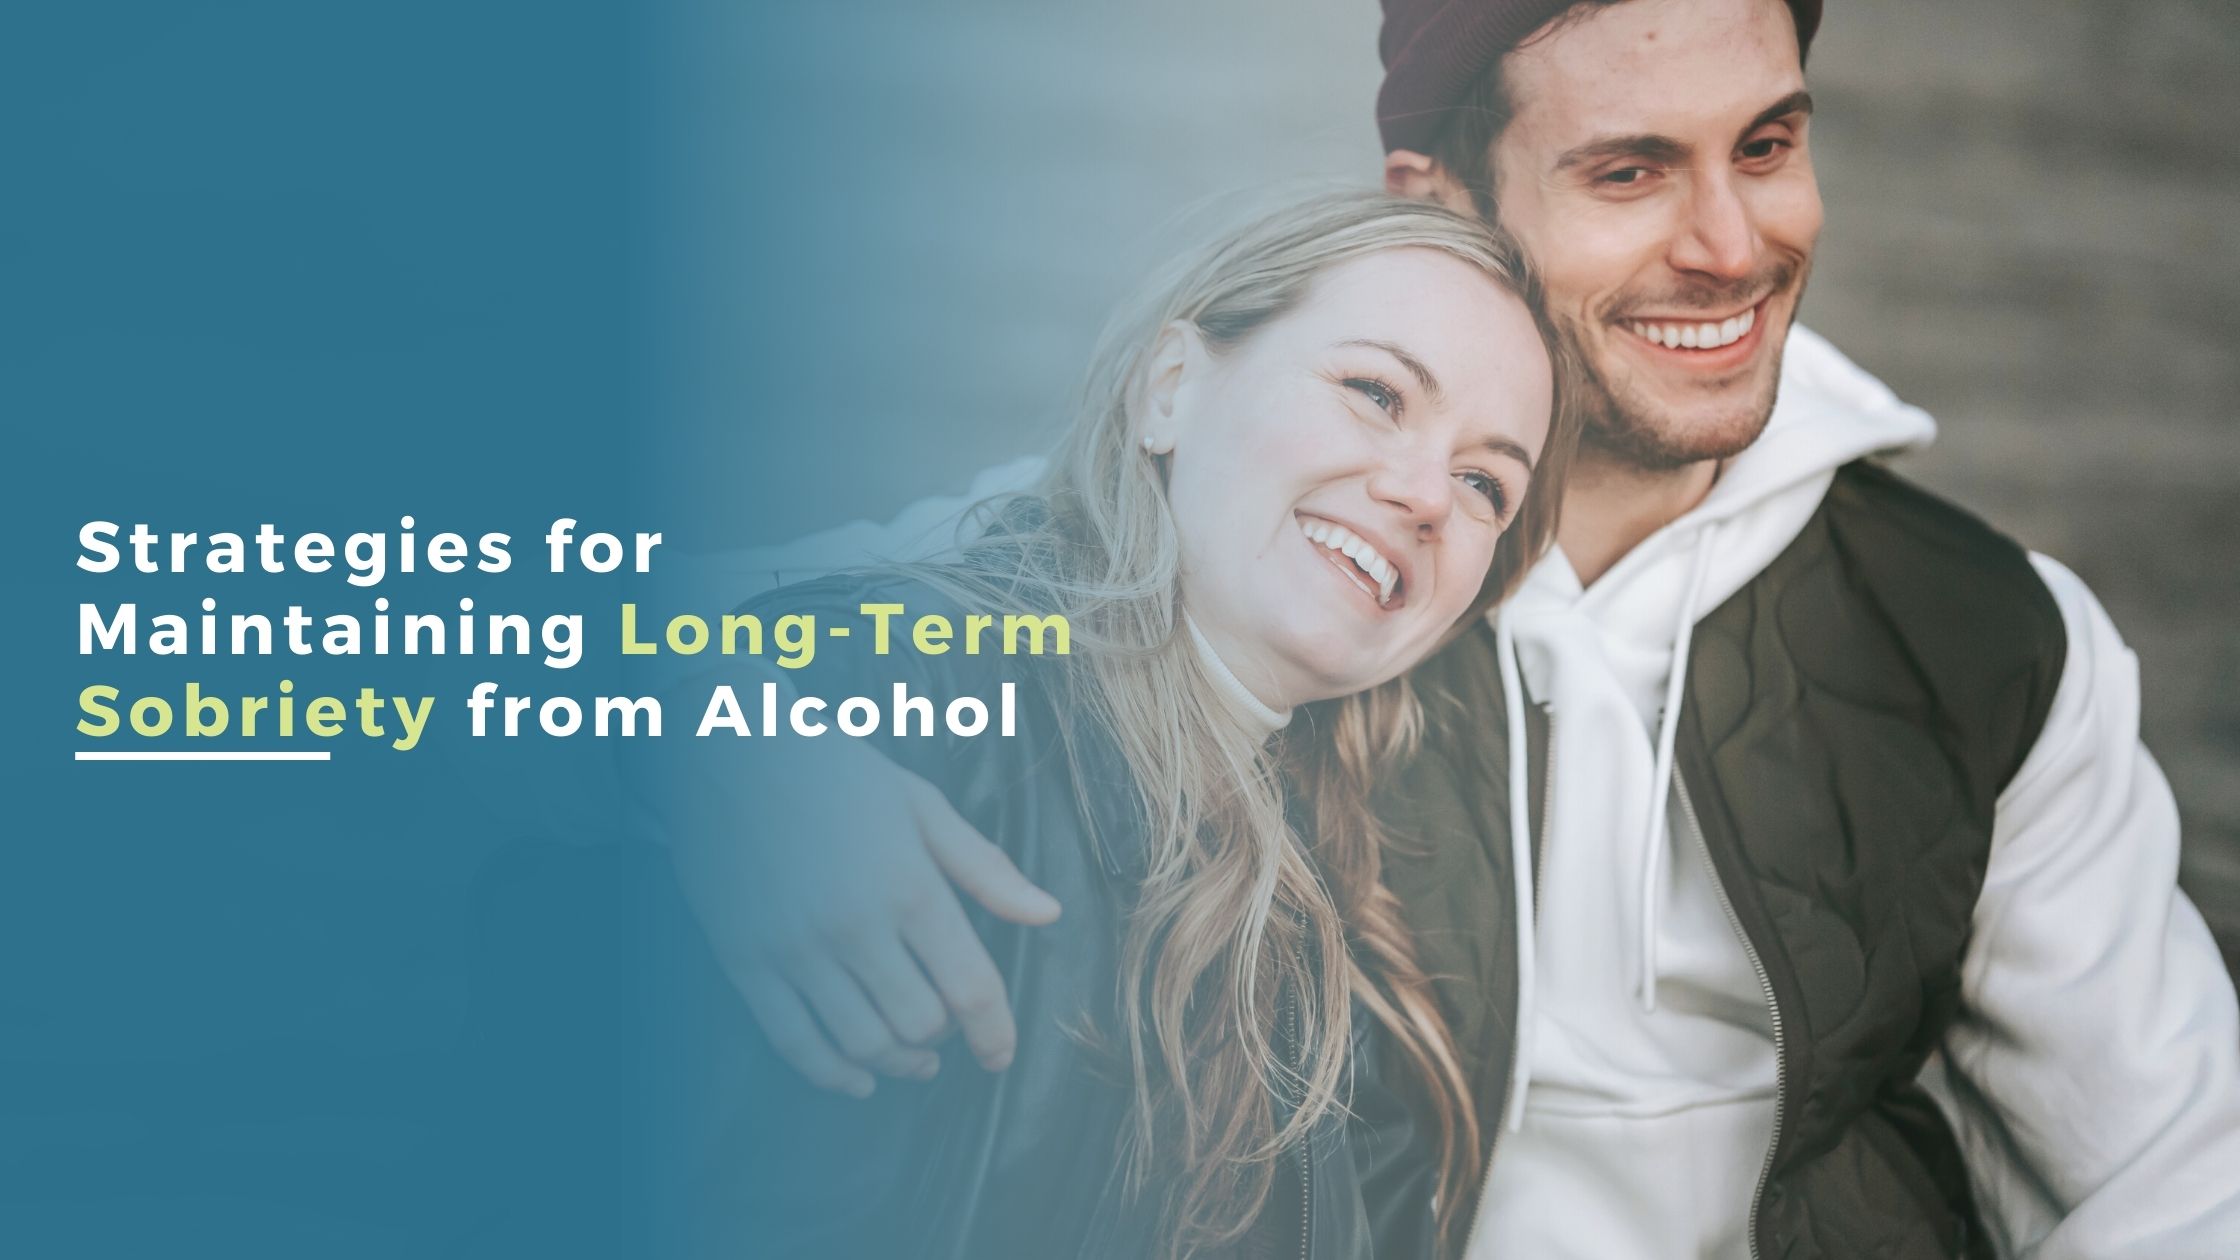 Long-Term Sobriety from Alcohol